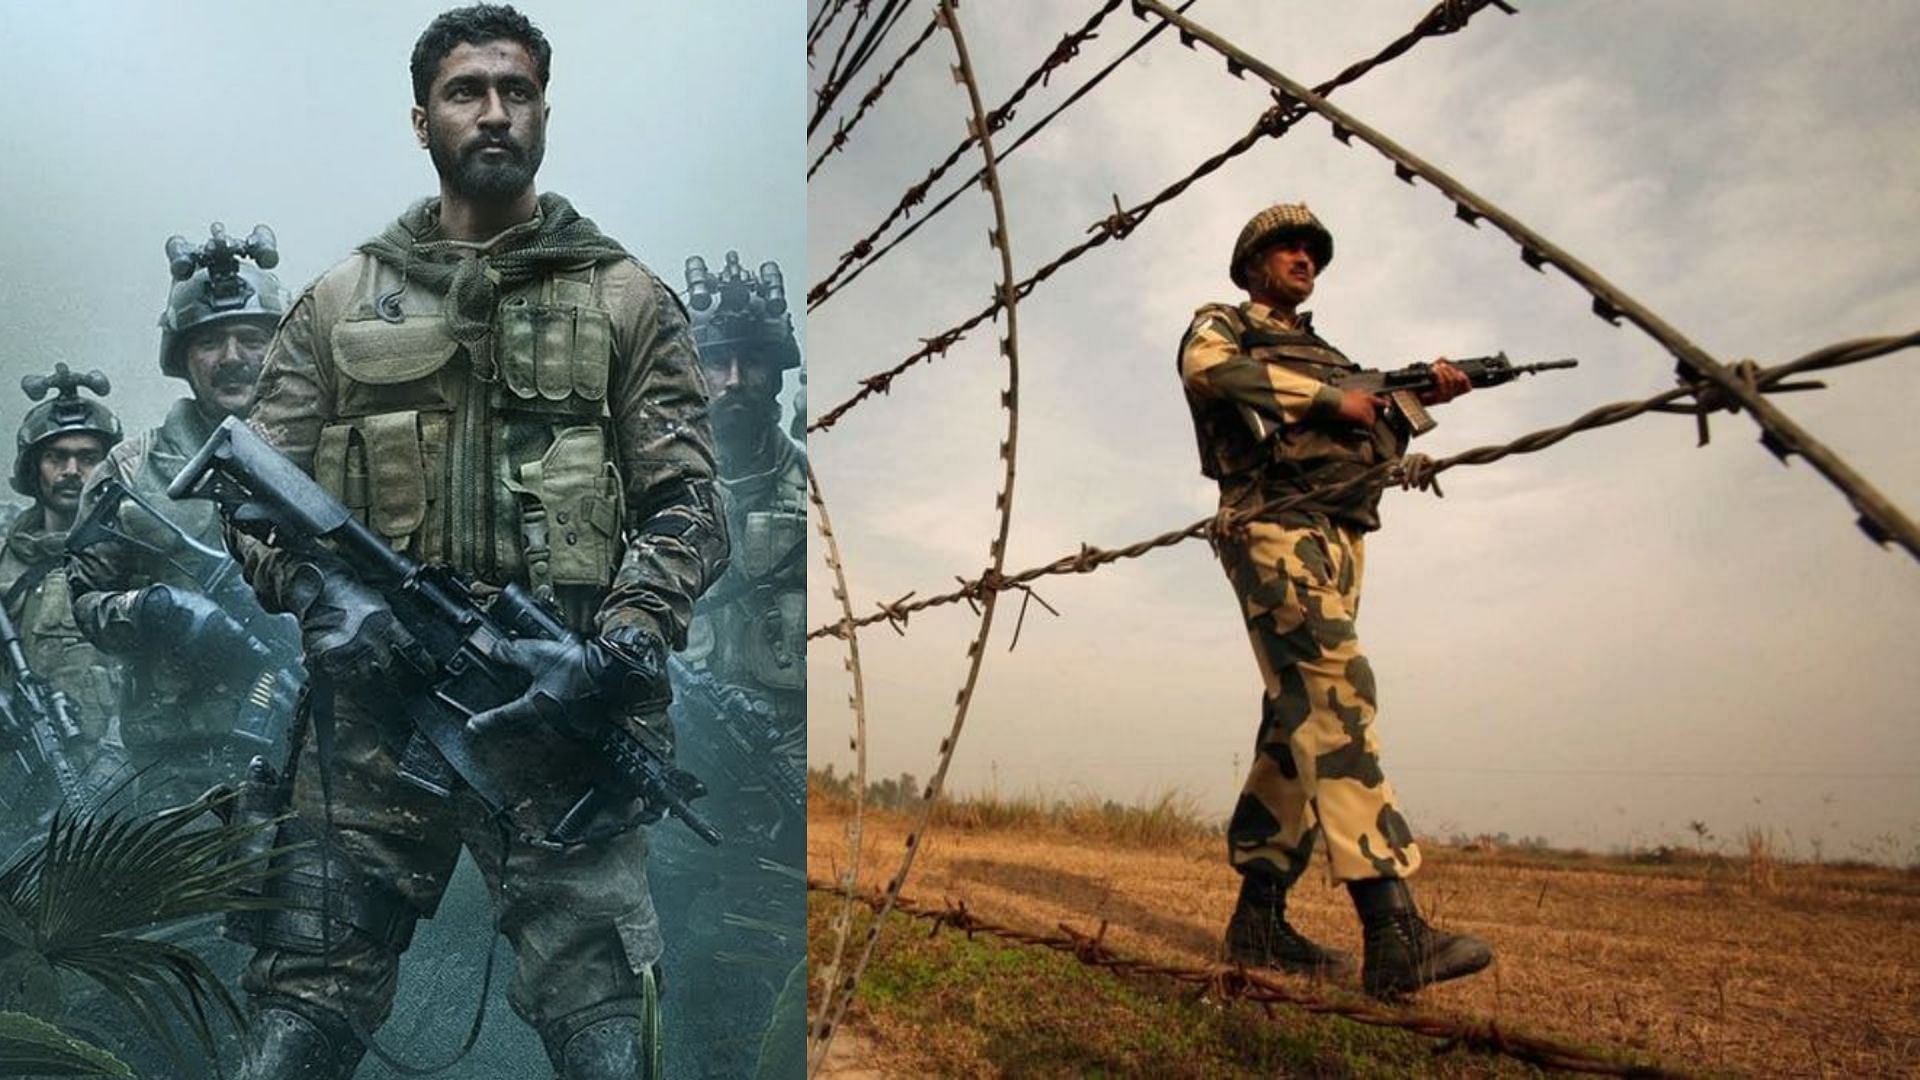 Bollywood rushes to register film titles related to the revocation of Article 370 in Jammu and Kashmir.